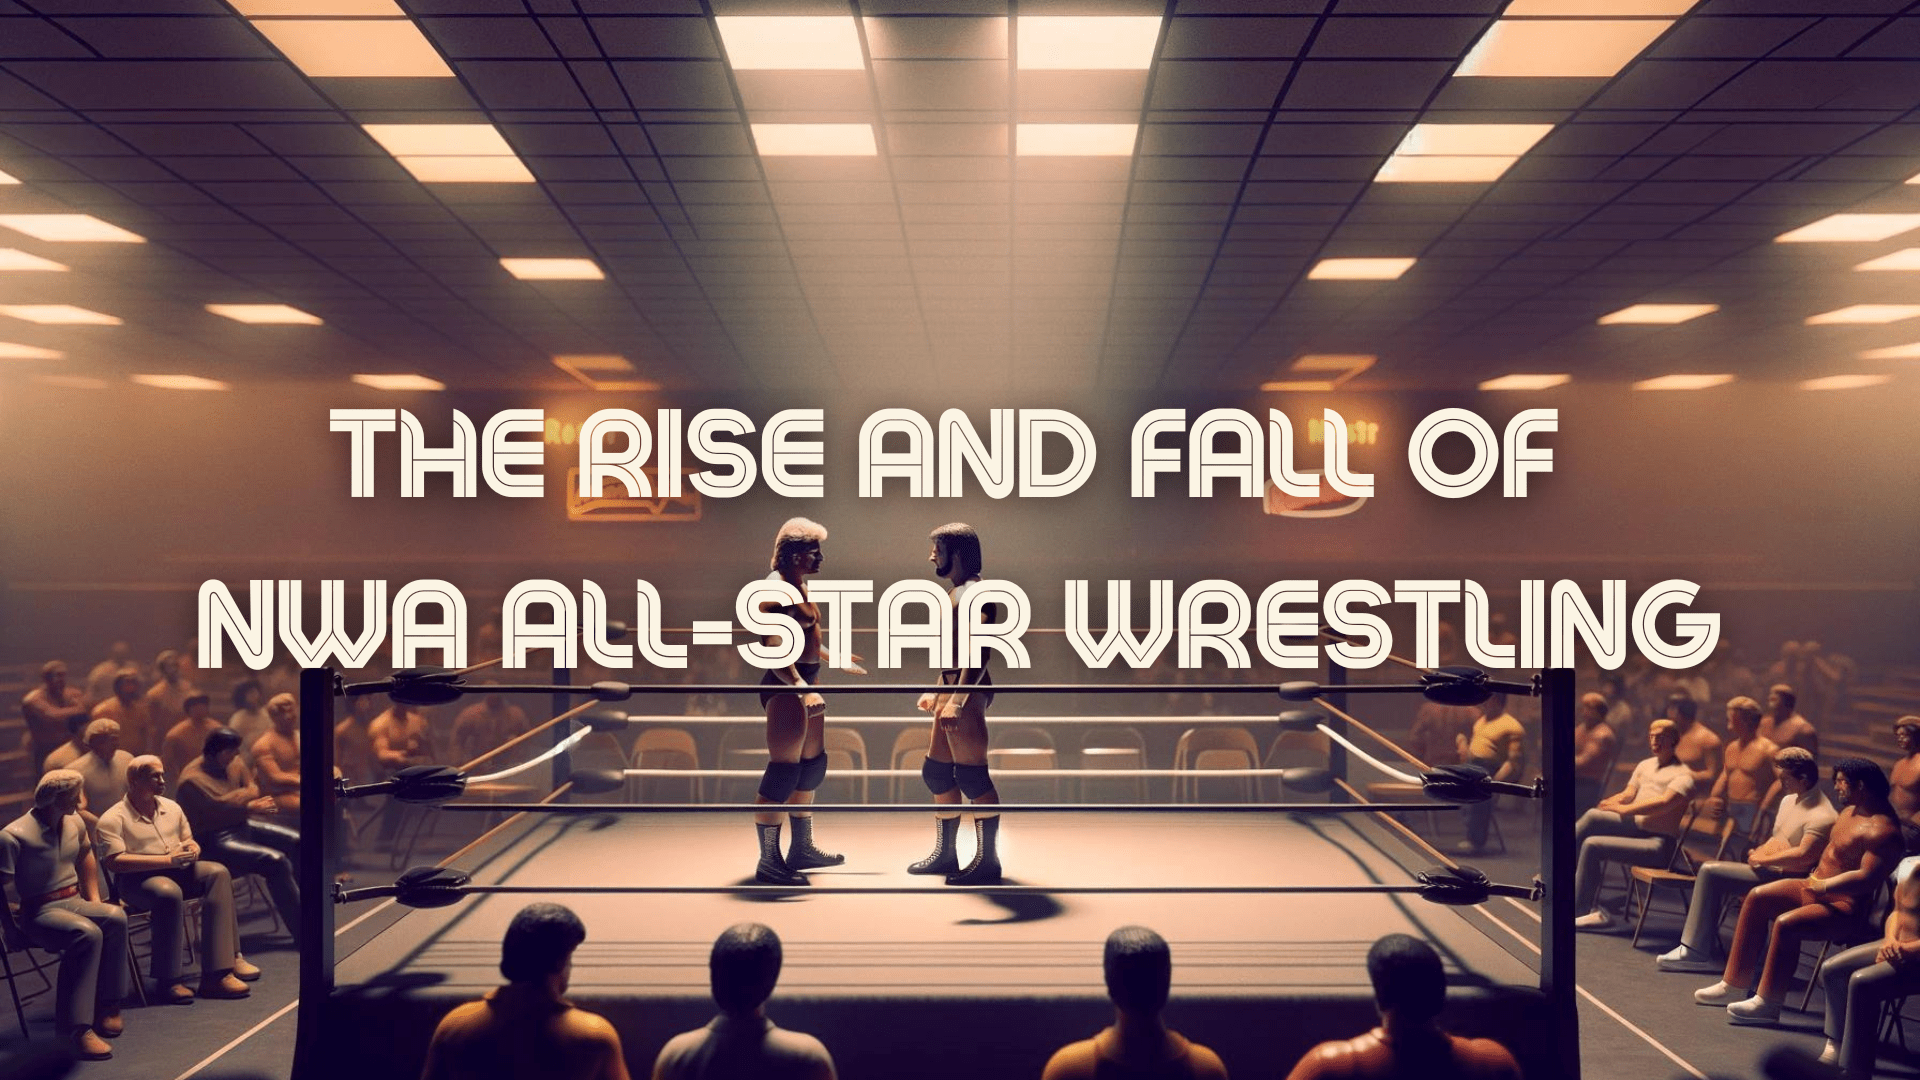 NWA All-Star Wrestling Featured Image